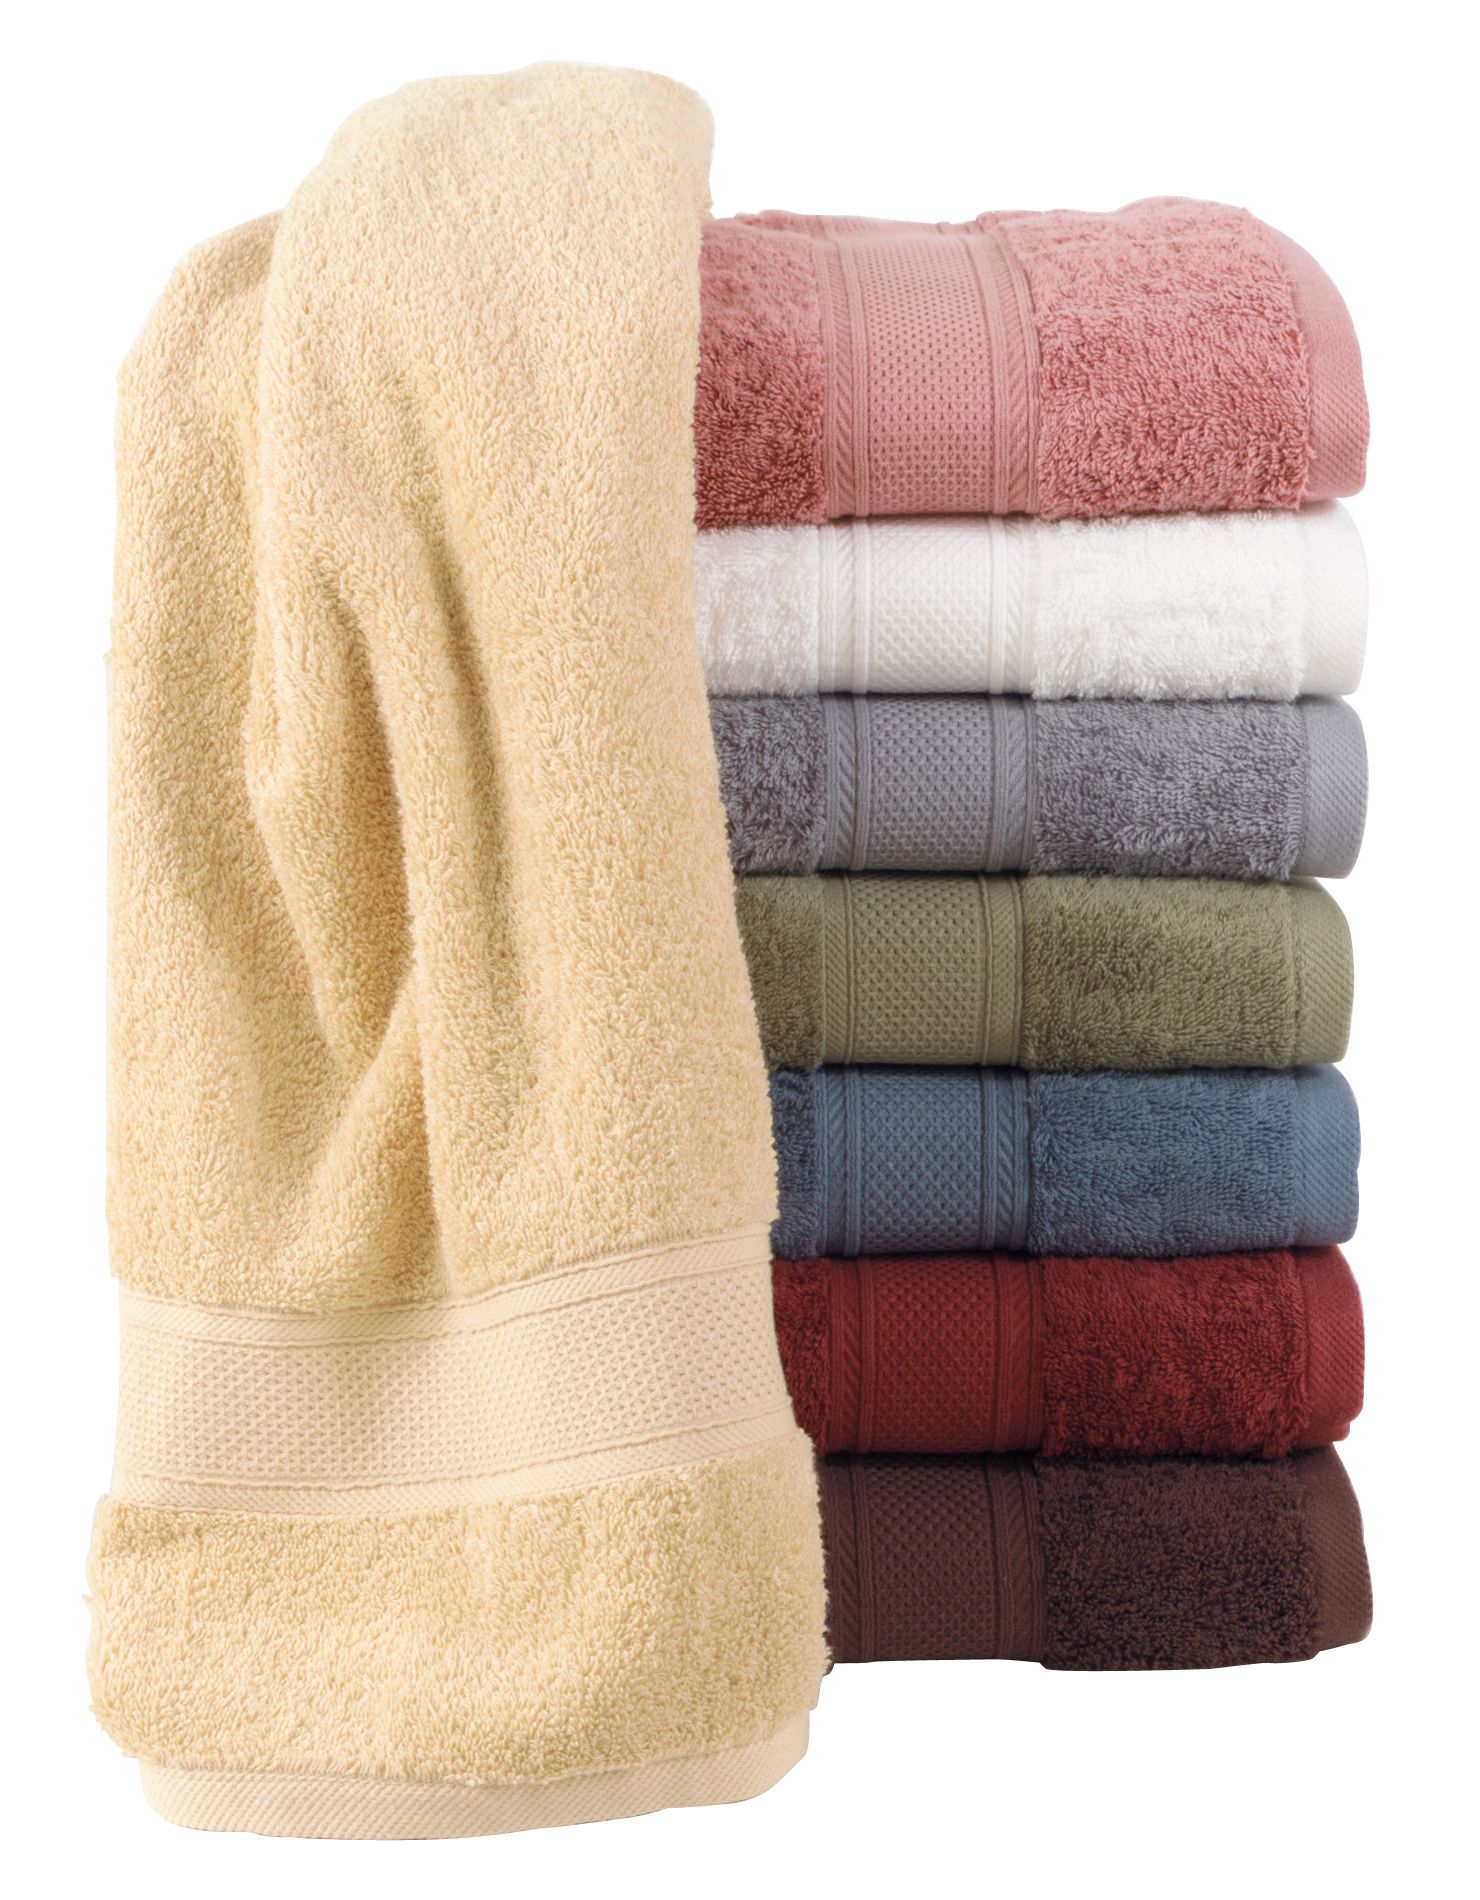 Abbey Hill Ringspun Combed Cotton Bath Towel